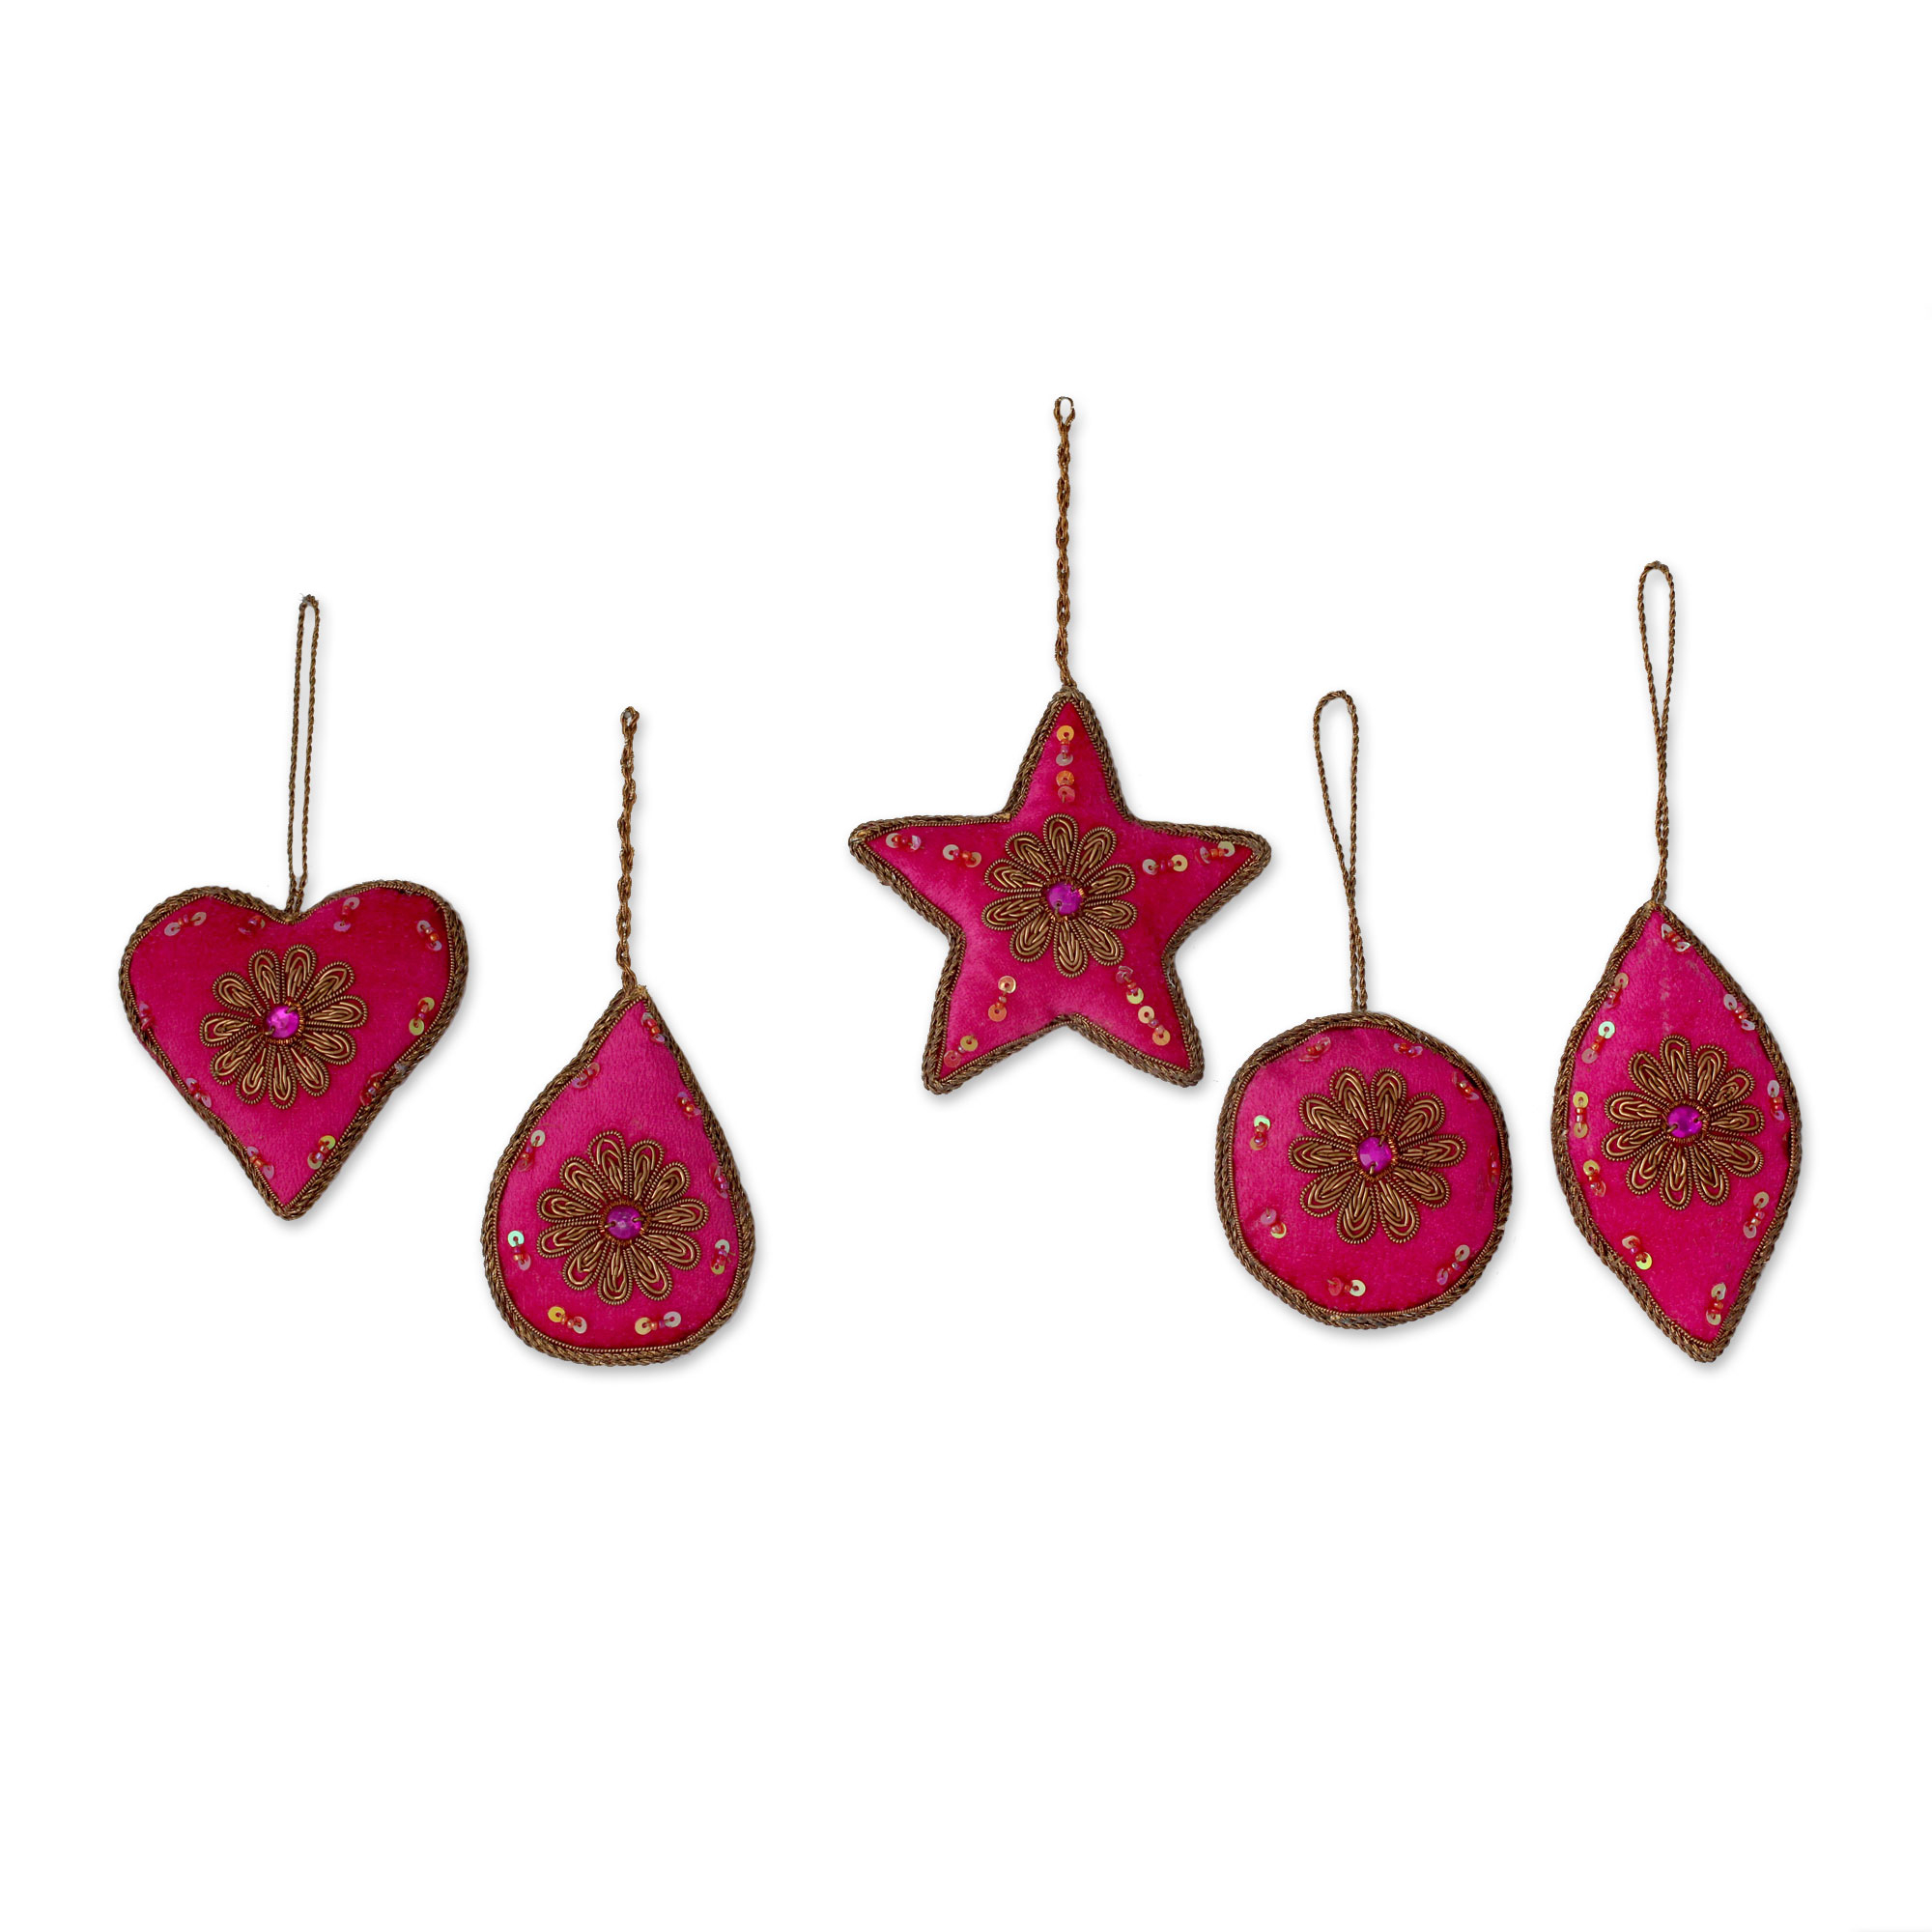 UNICEF Market | 5 Embroidered Velvet Christmas Ornaments Beads and ...